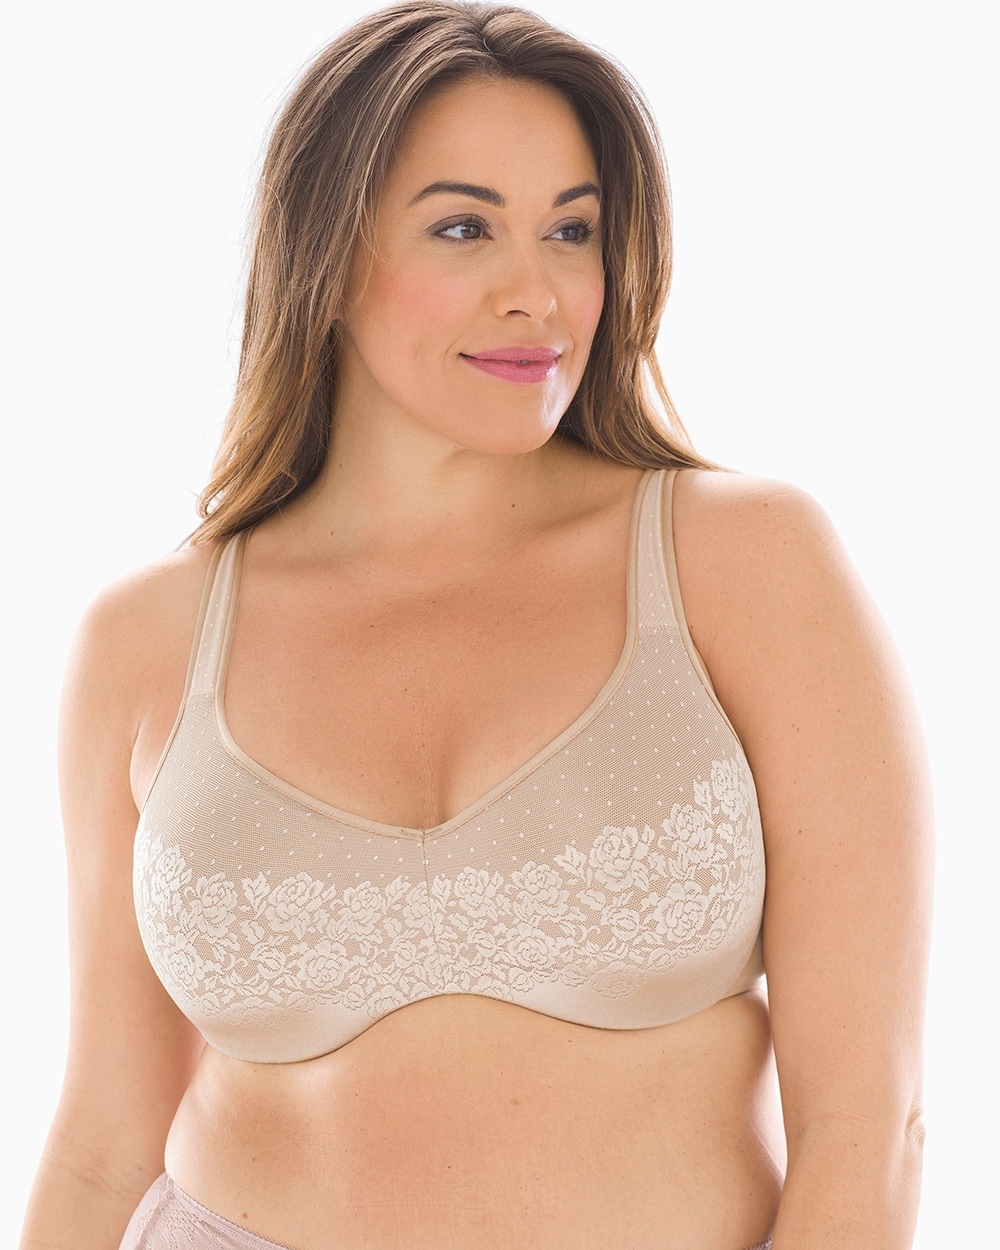 Soma Sensuous Sides Minimizer 3 Underwire Bra Tan 38G Full Coverage Unlined